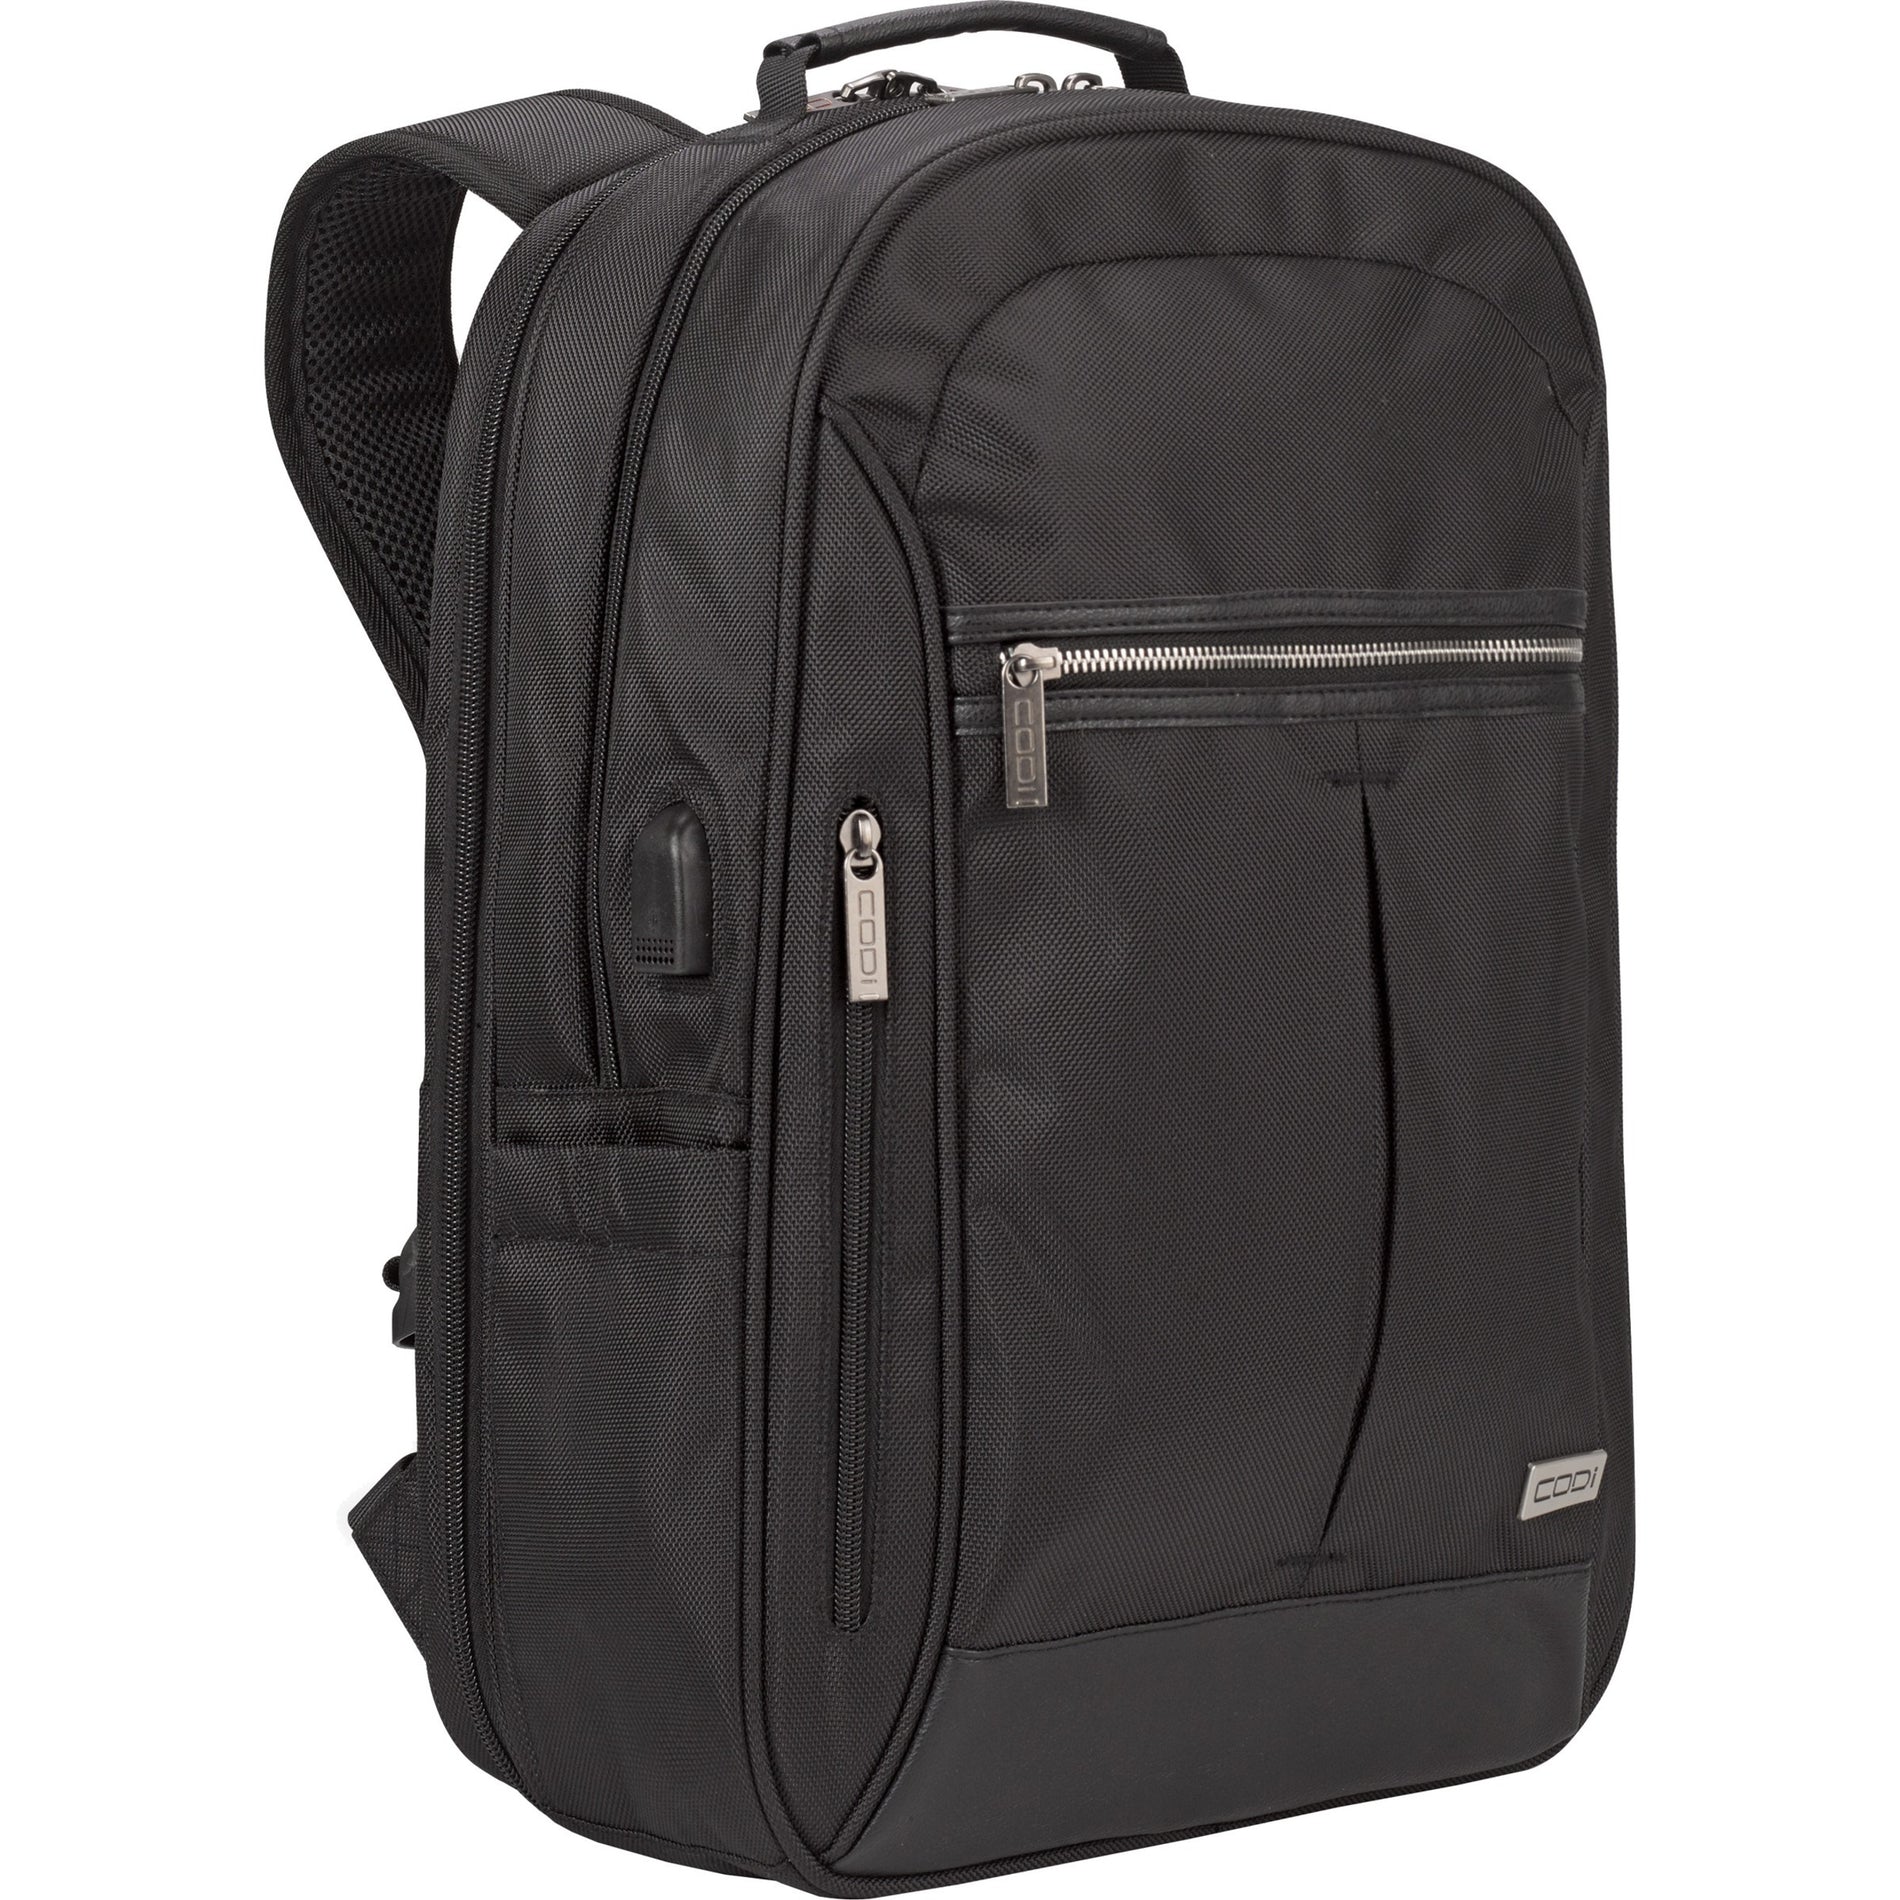 CODi Salvus 15.6" Backpack - Secure and Stylish Laptop and Tablet Carrying Case [Discontinued]